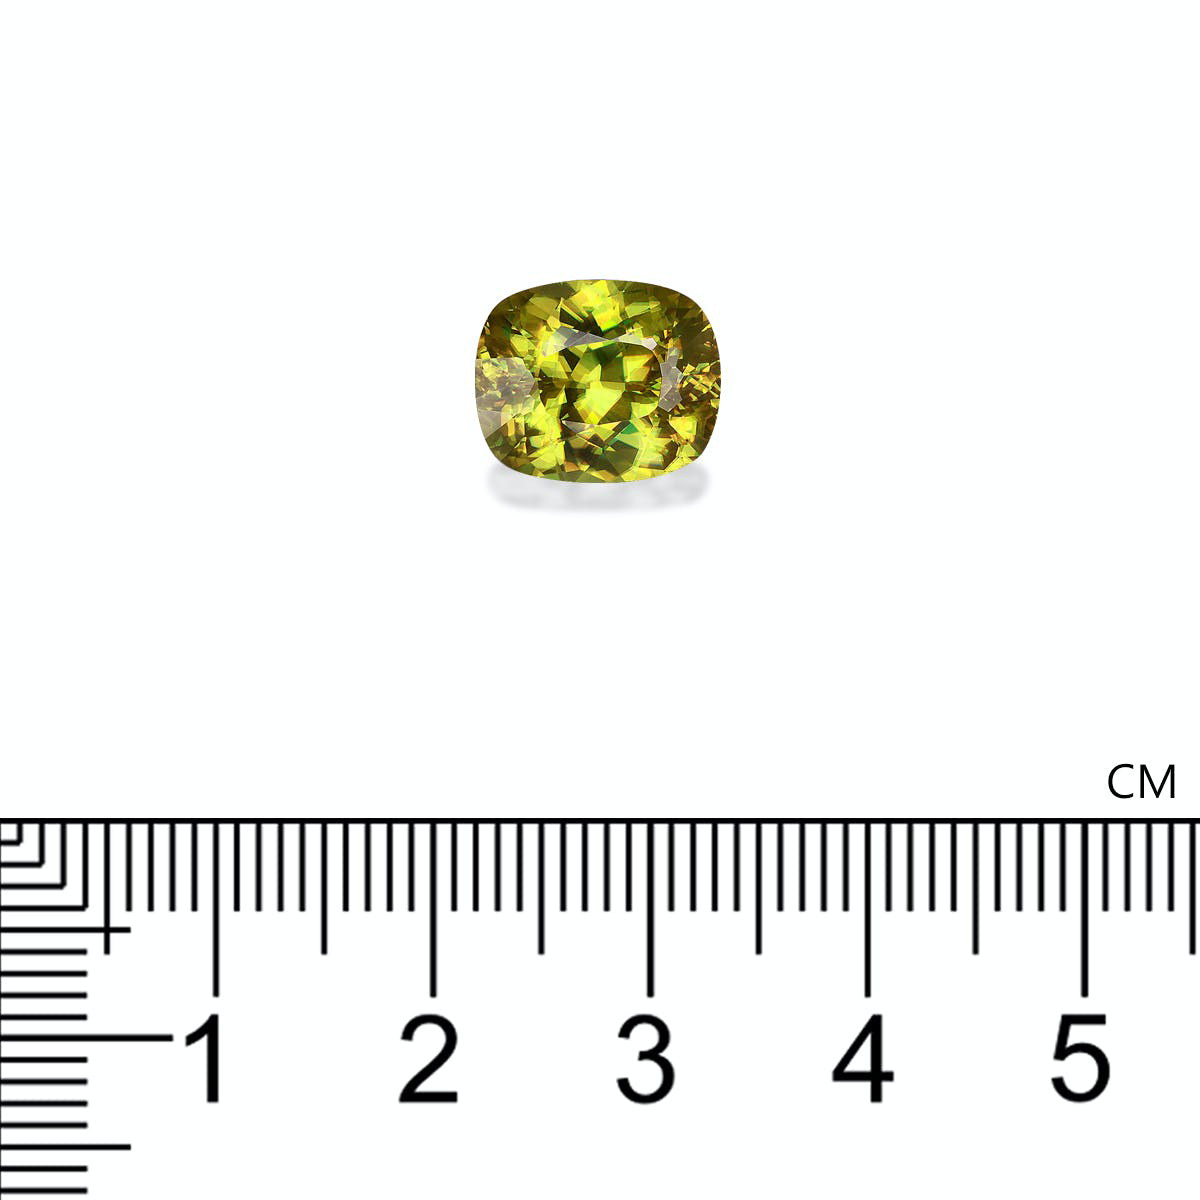 Picture of Lime Green Sphene 5.23ct - 11x9mm (SH0644)